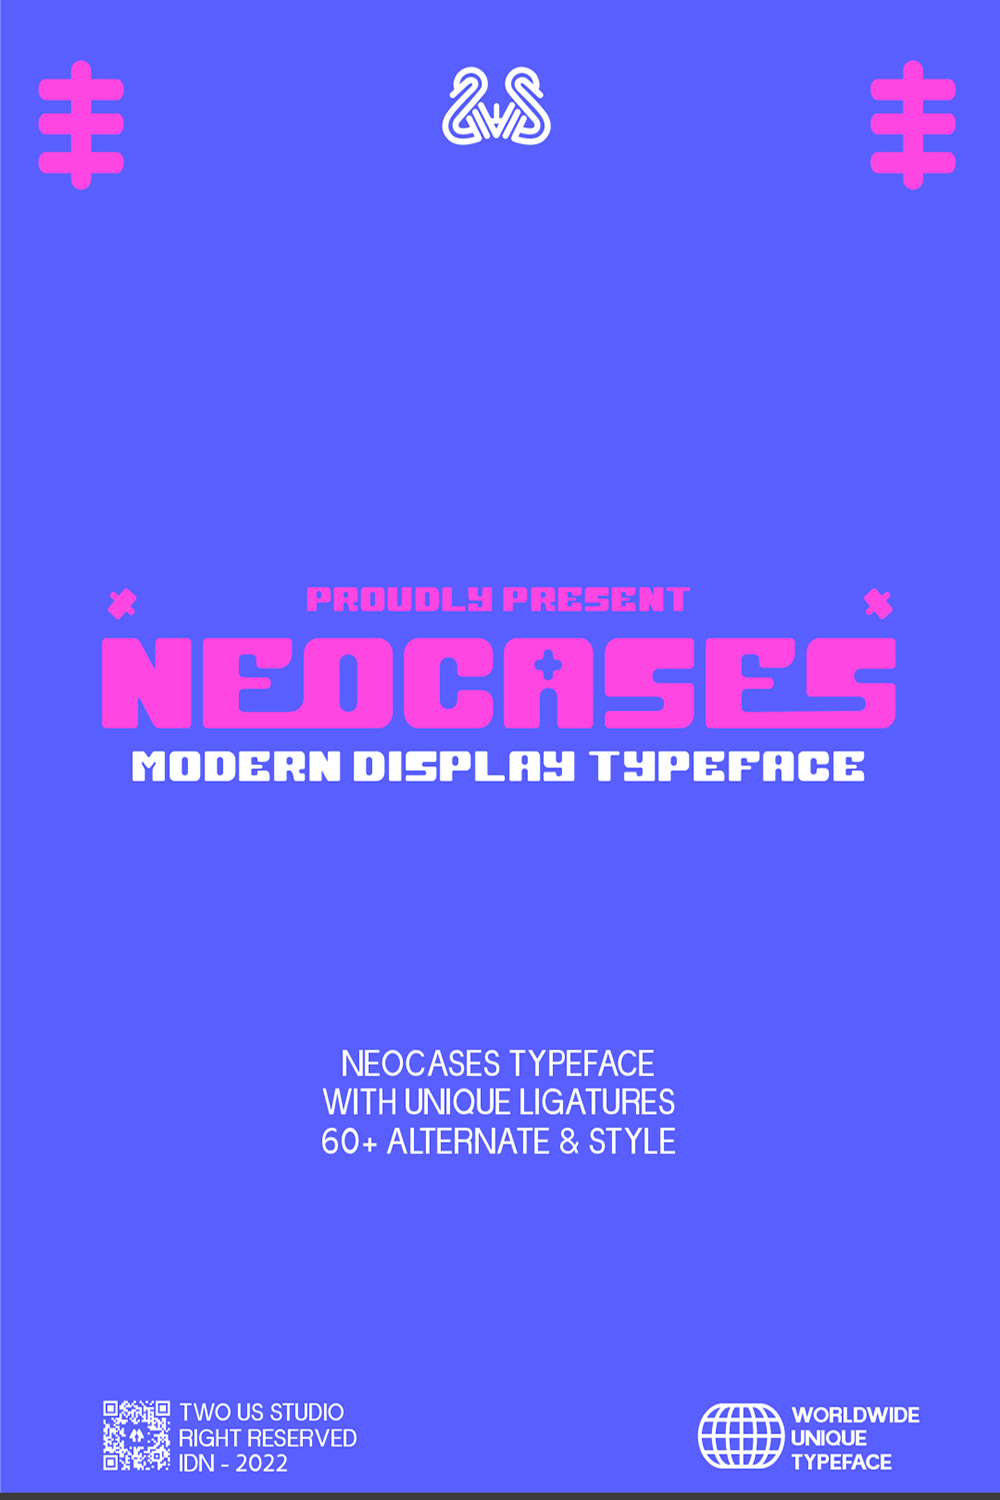 Neocases - Modern Display Typeface Pinterest Collage image.